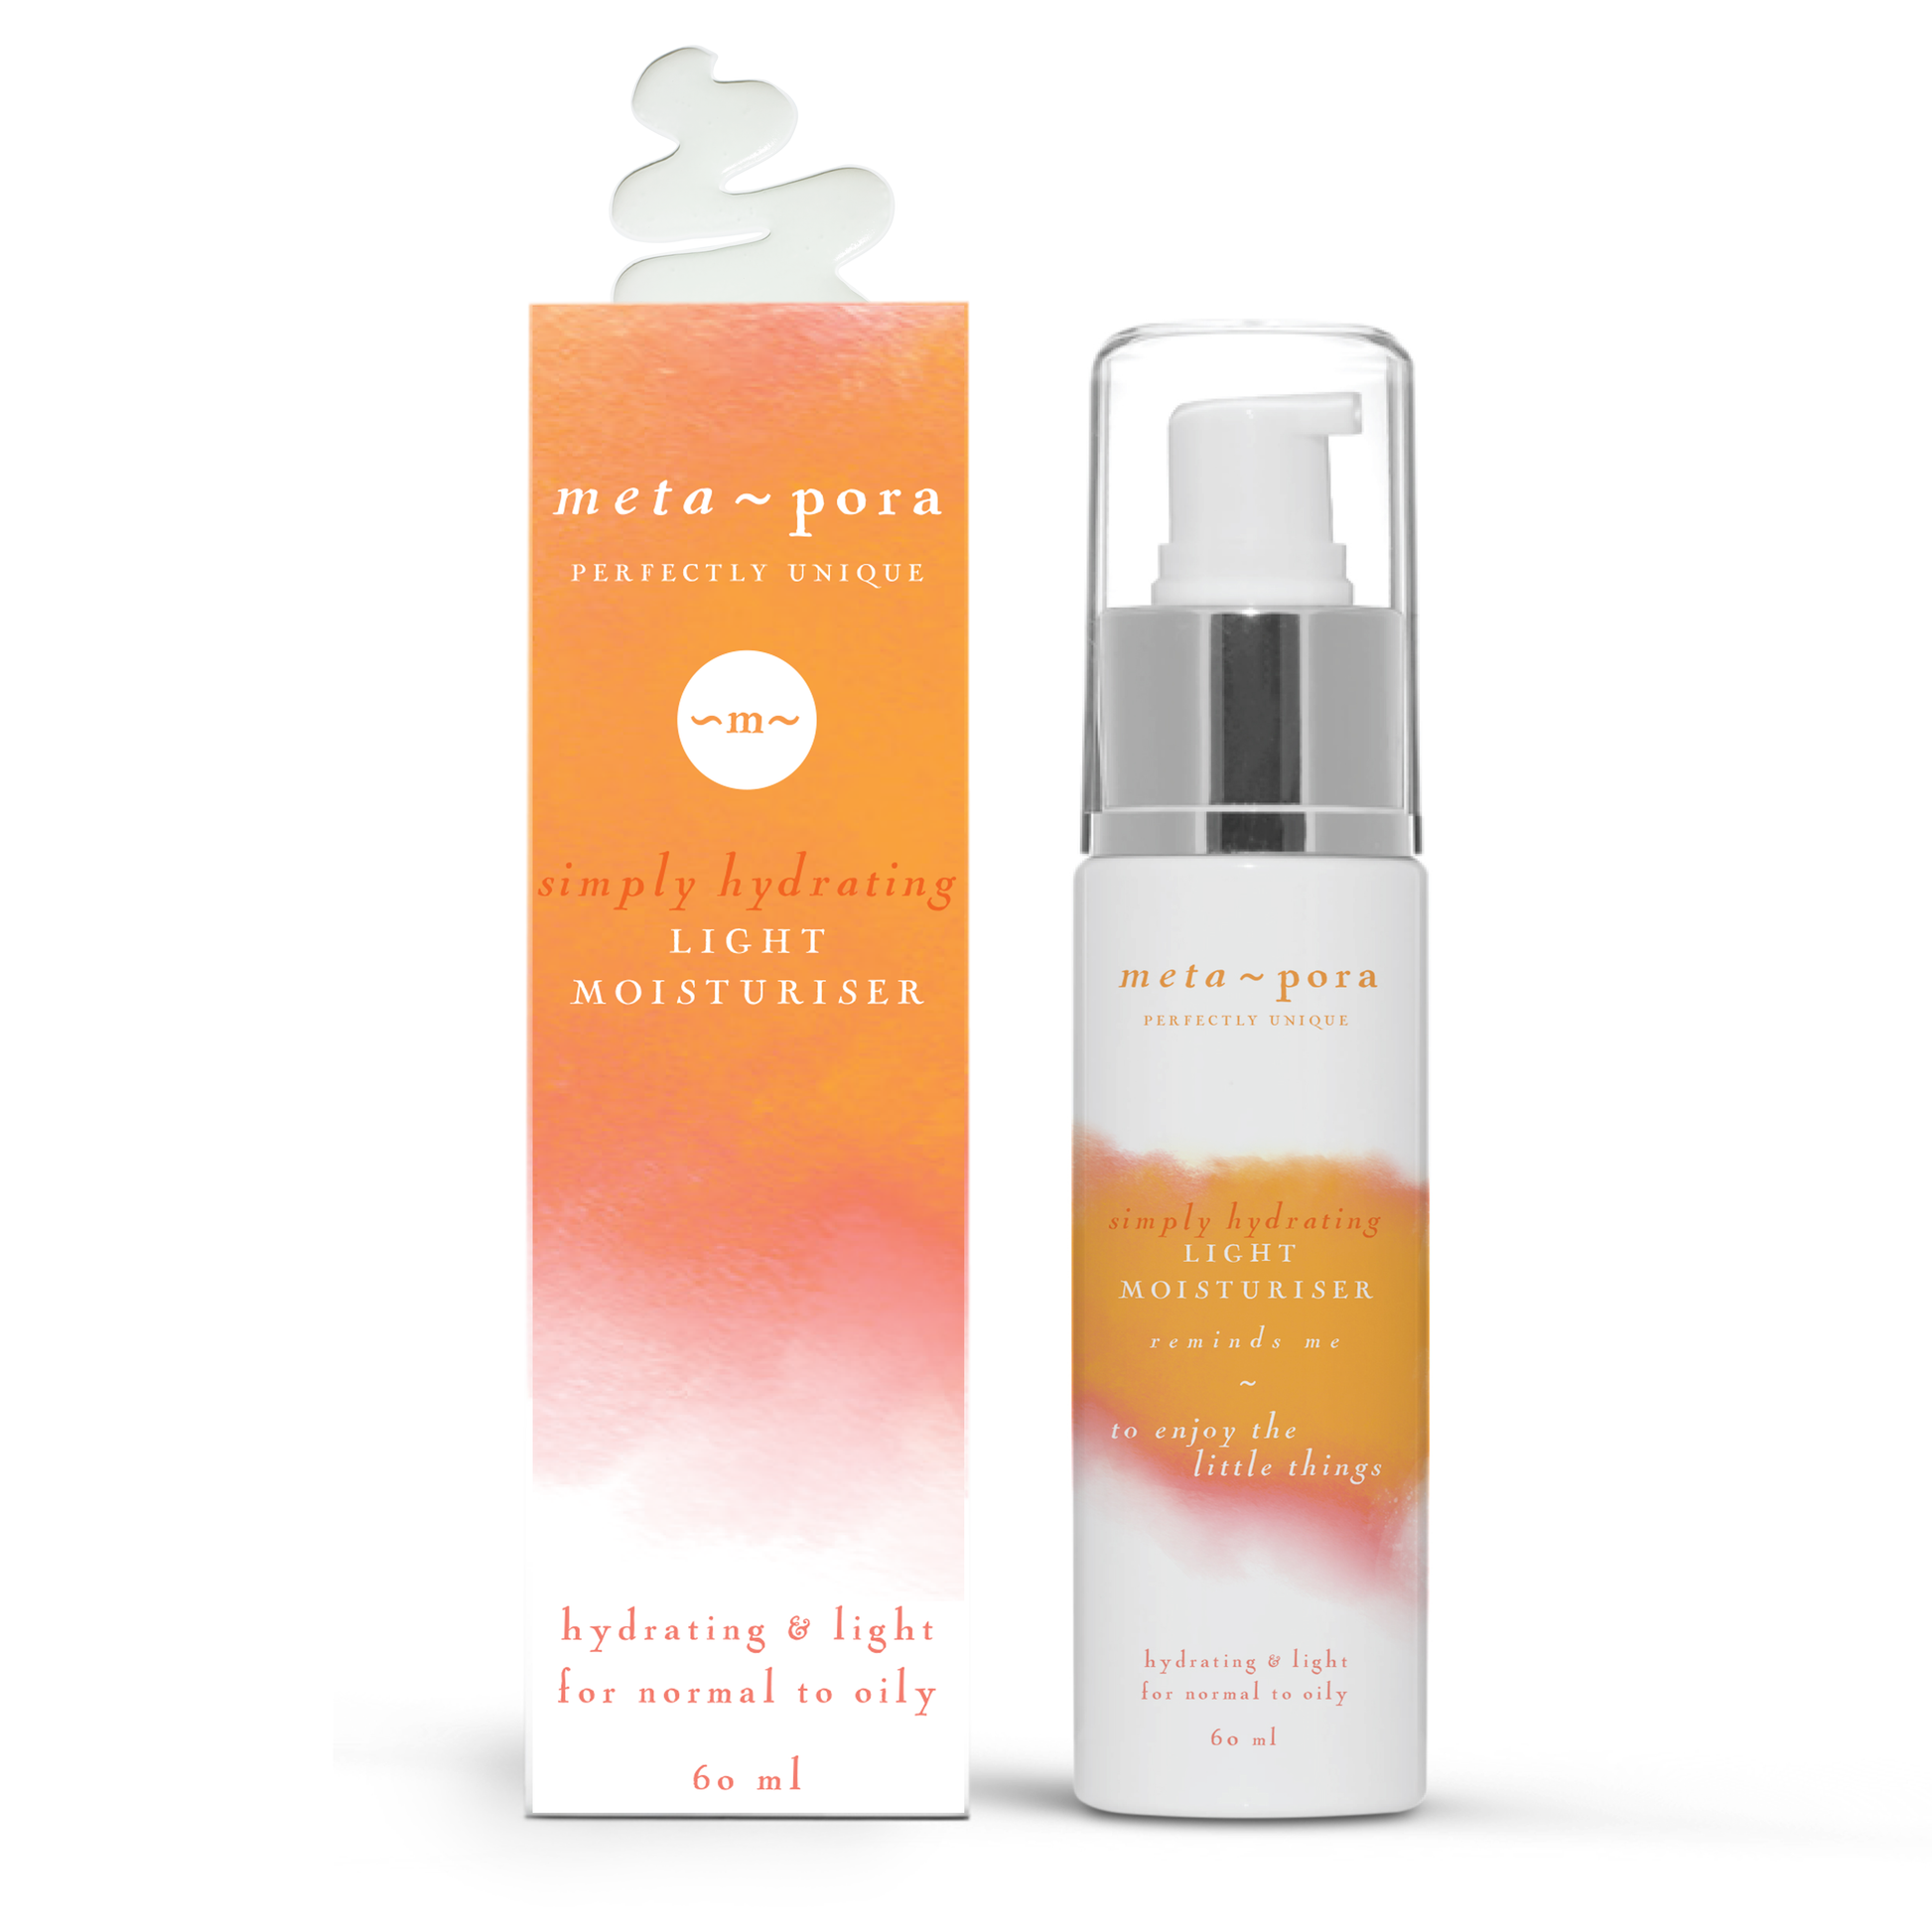 A lightweight dual-action moisturizer that effectively hydrates the skin whilst a natural skin-balancing salicylic acid blend of White Willow Bark, Licorice, and Pineapple work to gradually dissolve dead skin. It works throughout the day to BALANCE your skin and inspire HAPPY thoughts. It's a perfect choice for anyone looking to infuse their skin with plumping hydration and a touch of gentle exfoliation. 